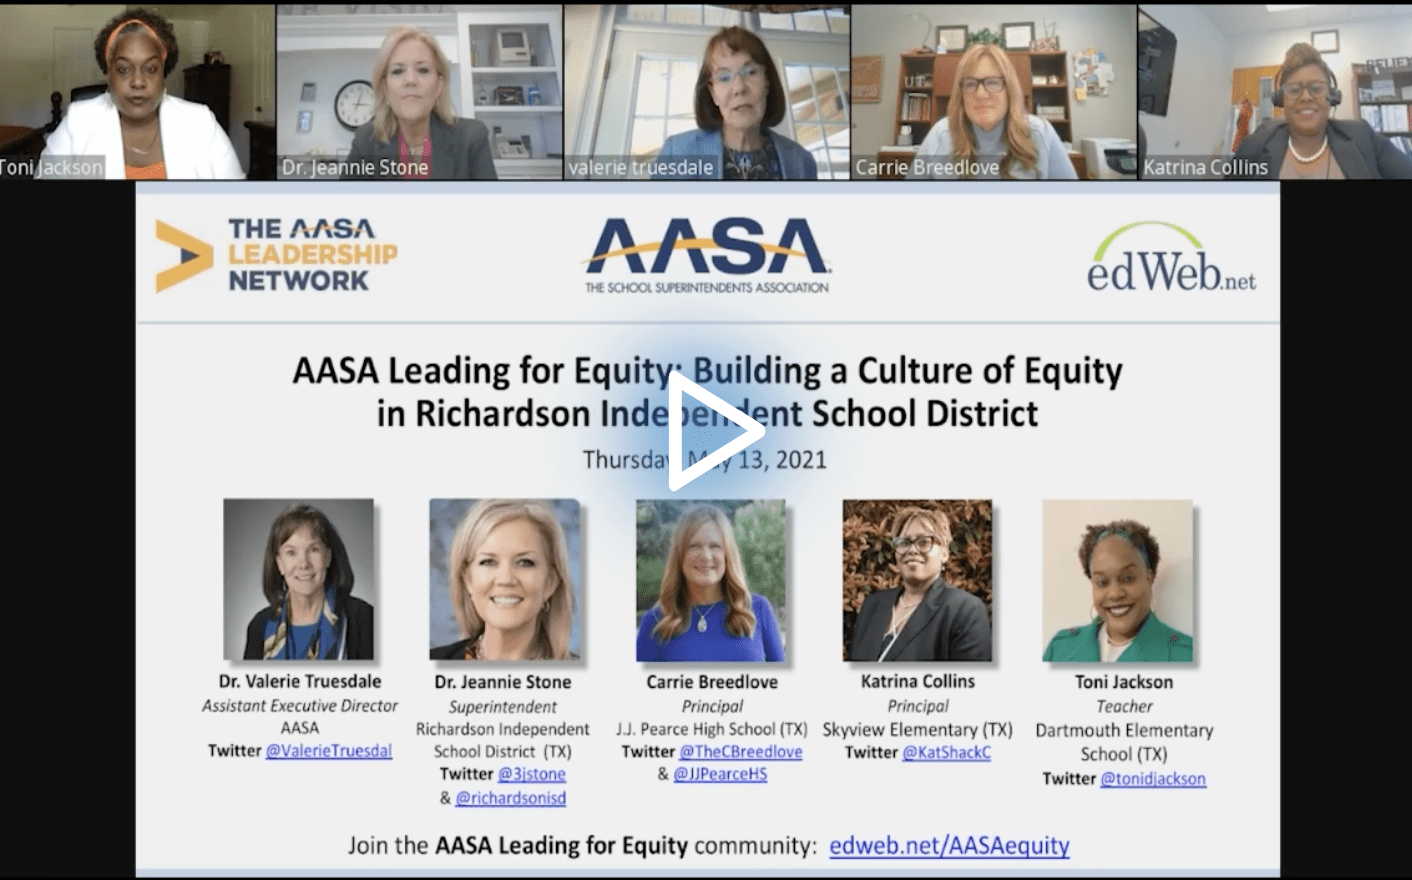 AASA Leading for Equity: Building a Culture of Equity in Richardson Independent School District edWebinar recording link